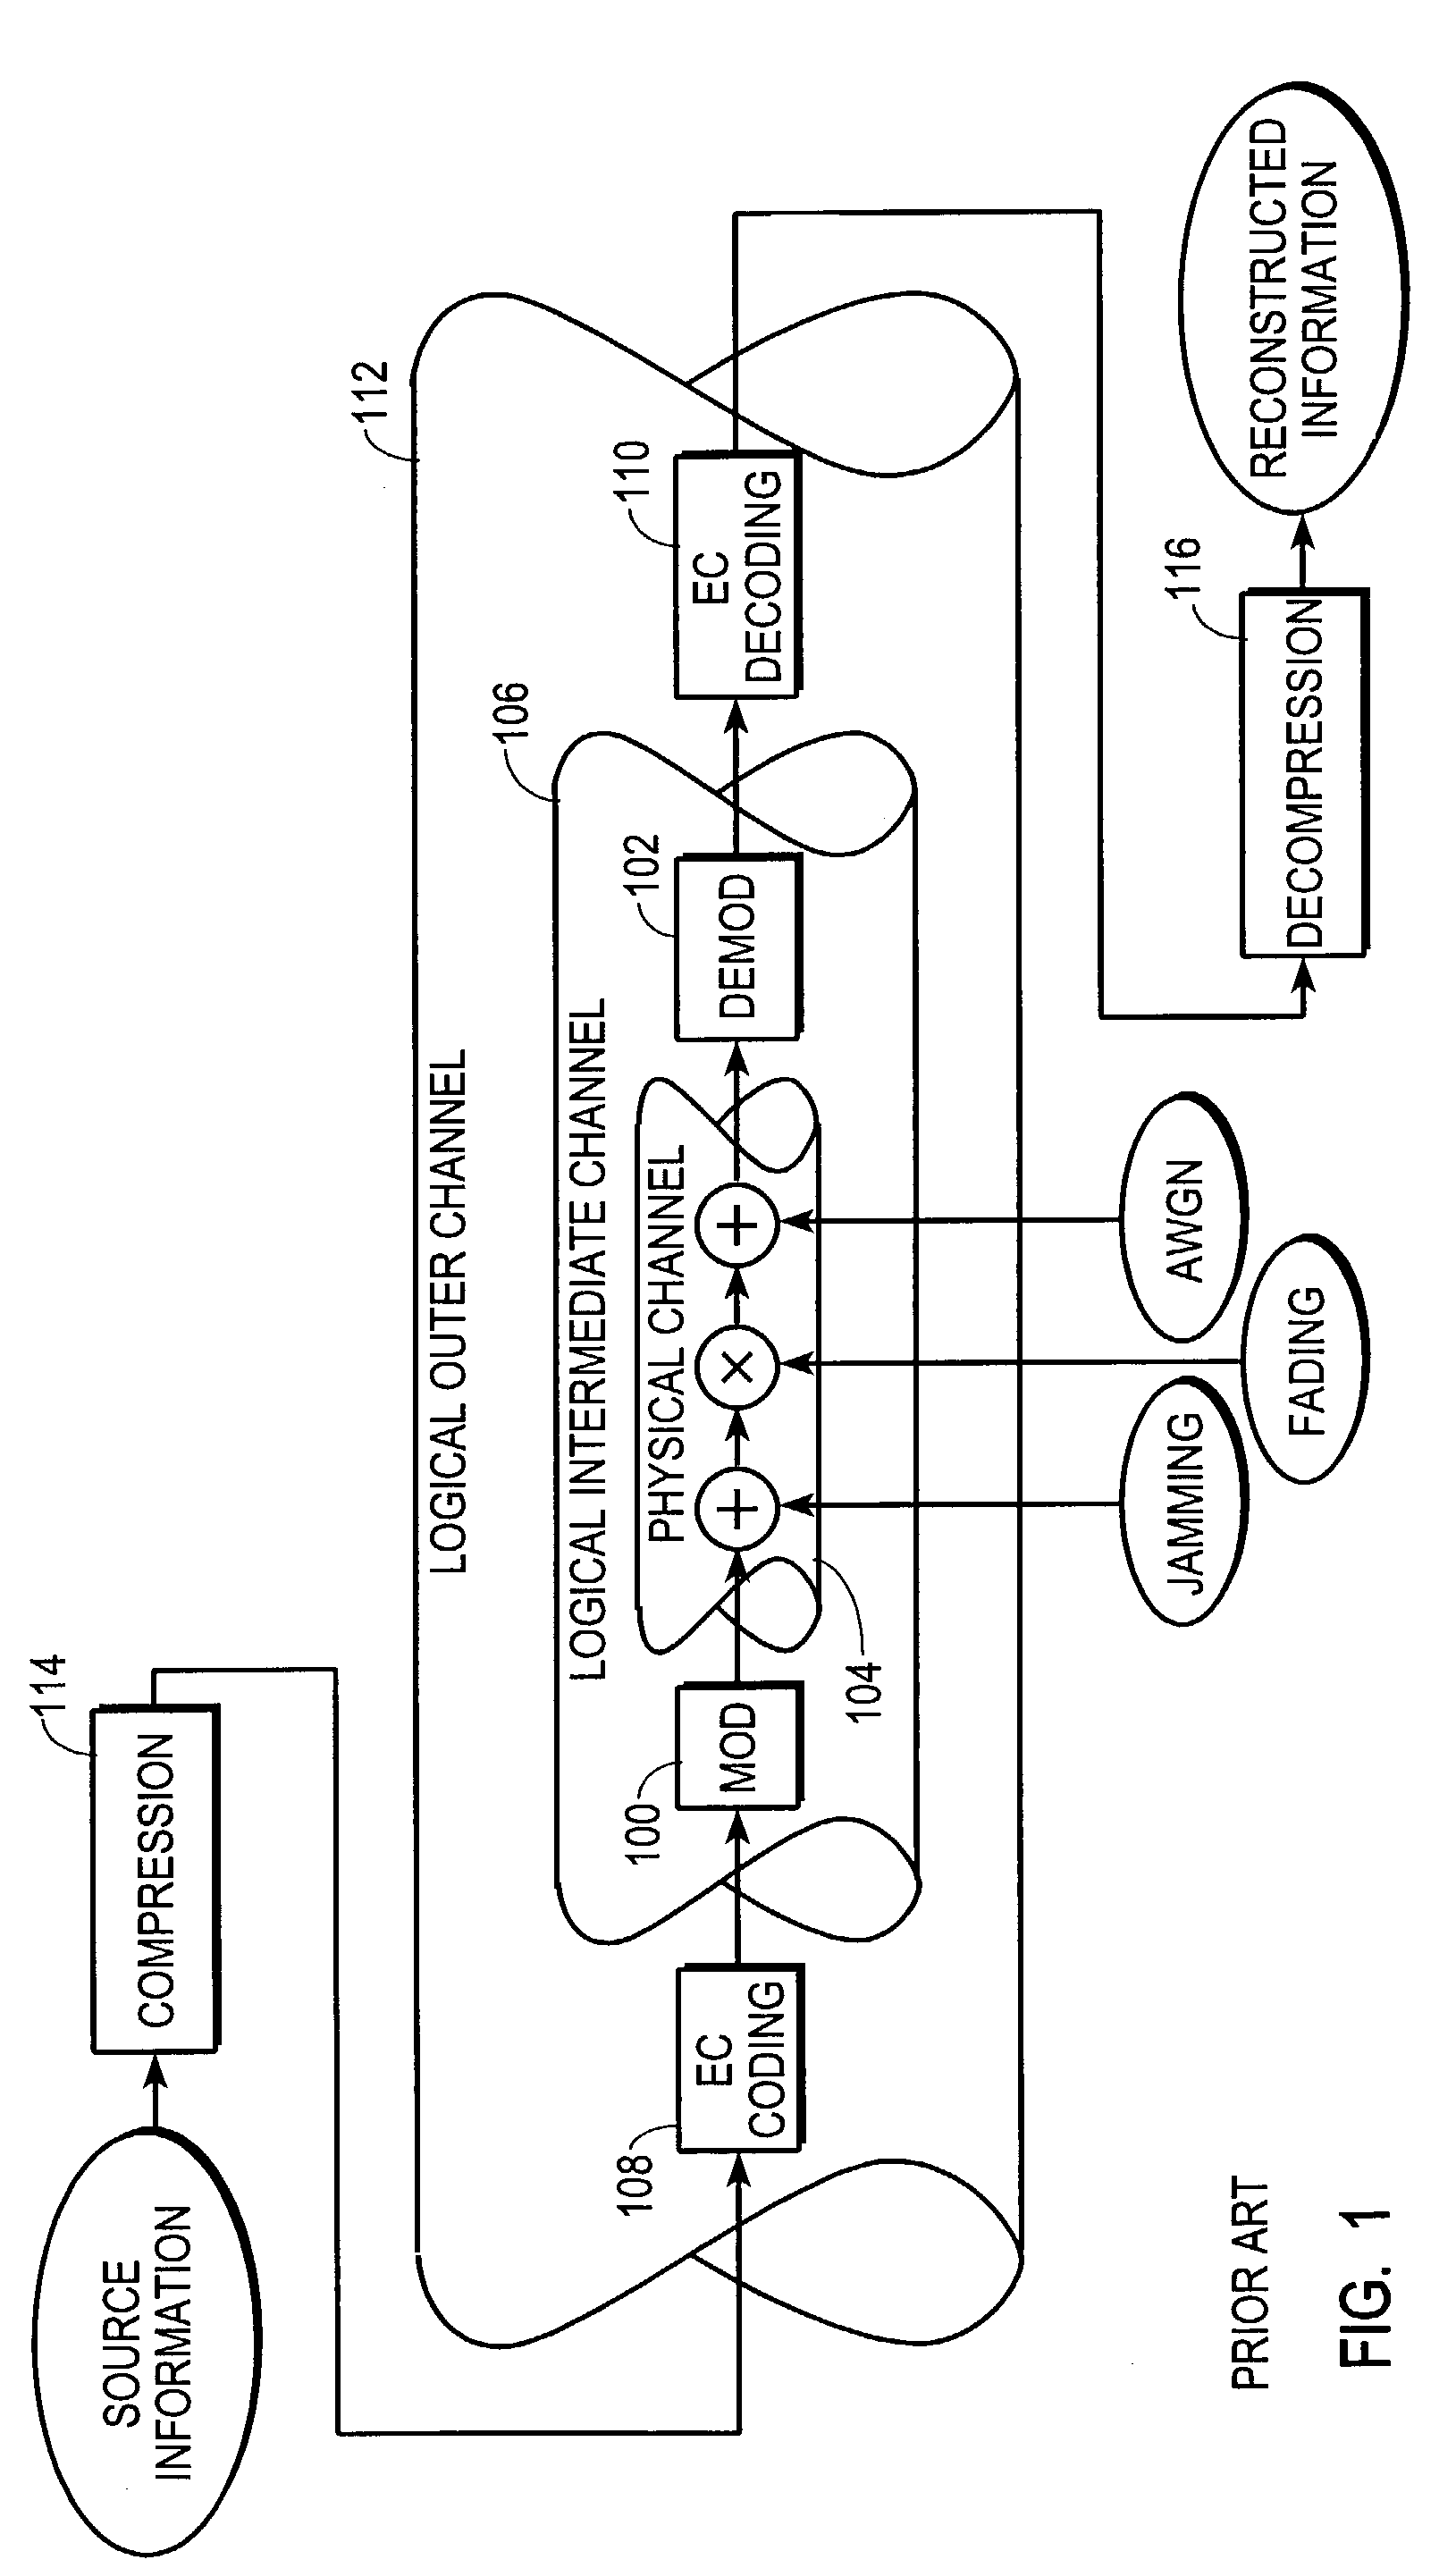 Multi-carrier modulation with source information allocated over variable quality communication channel